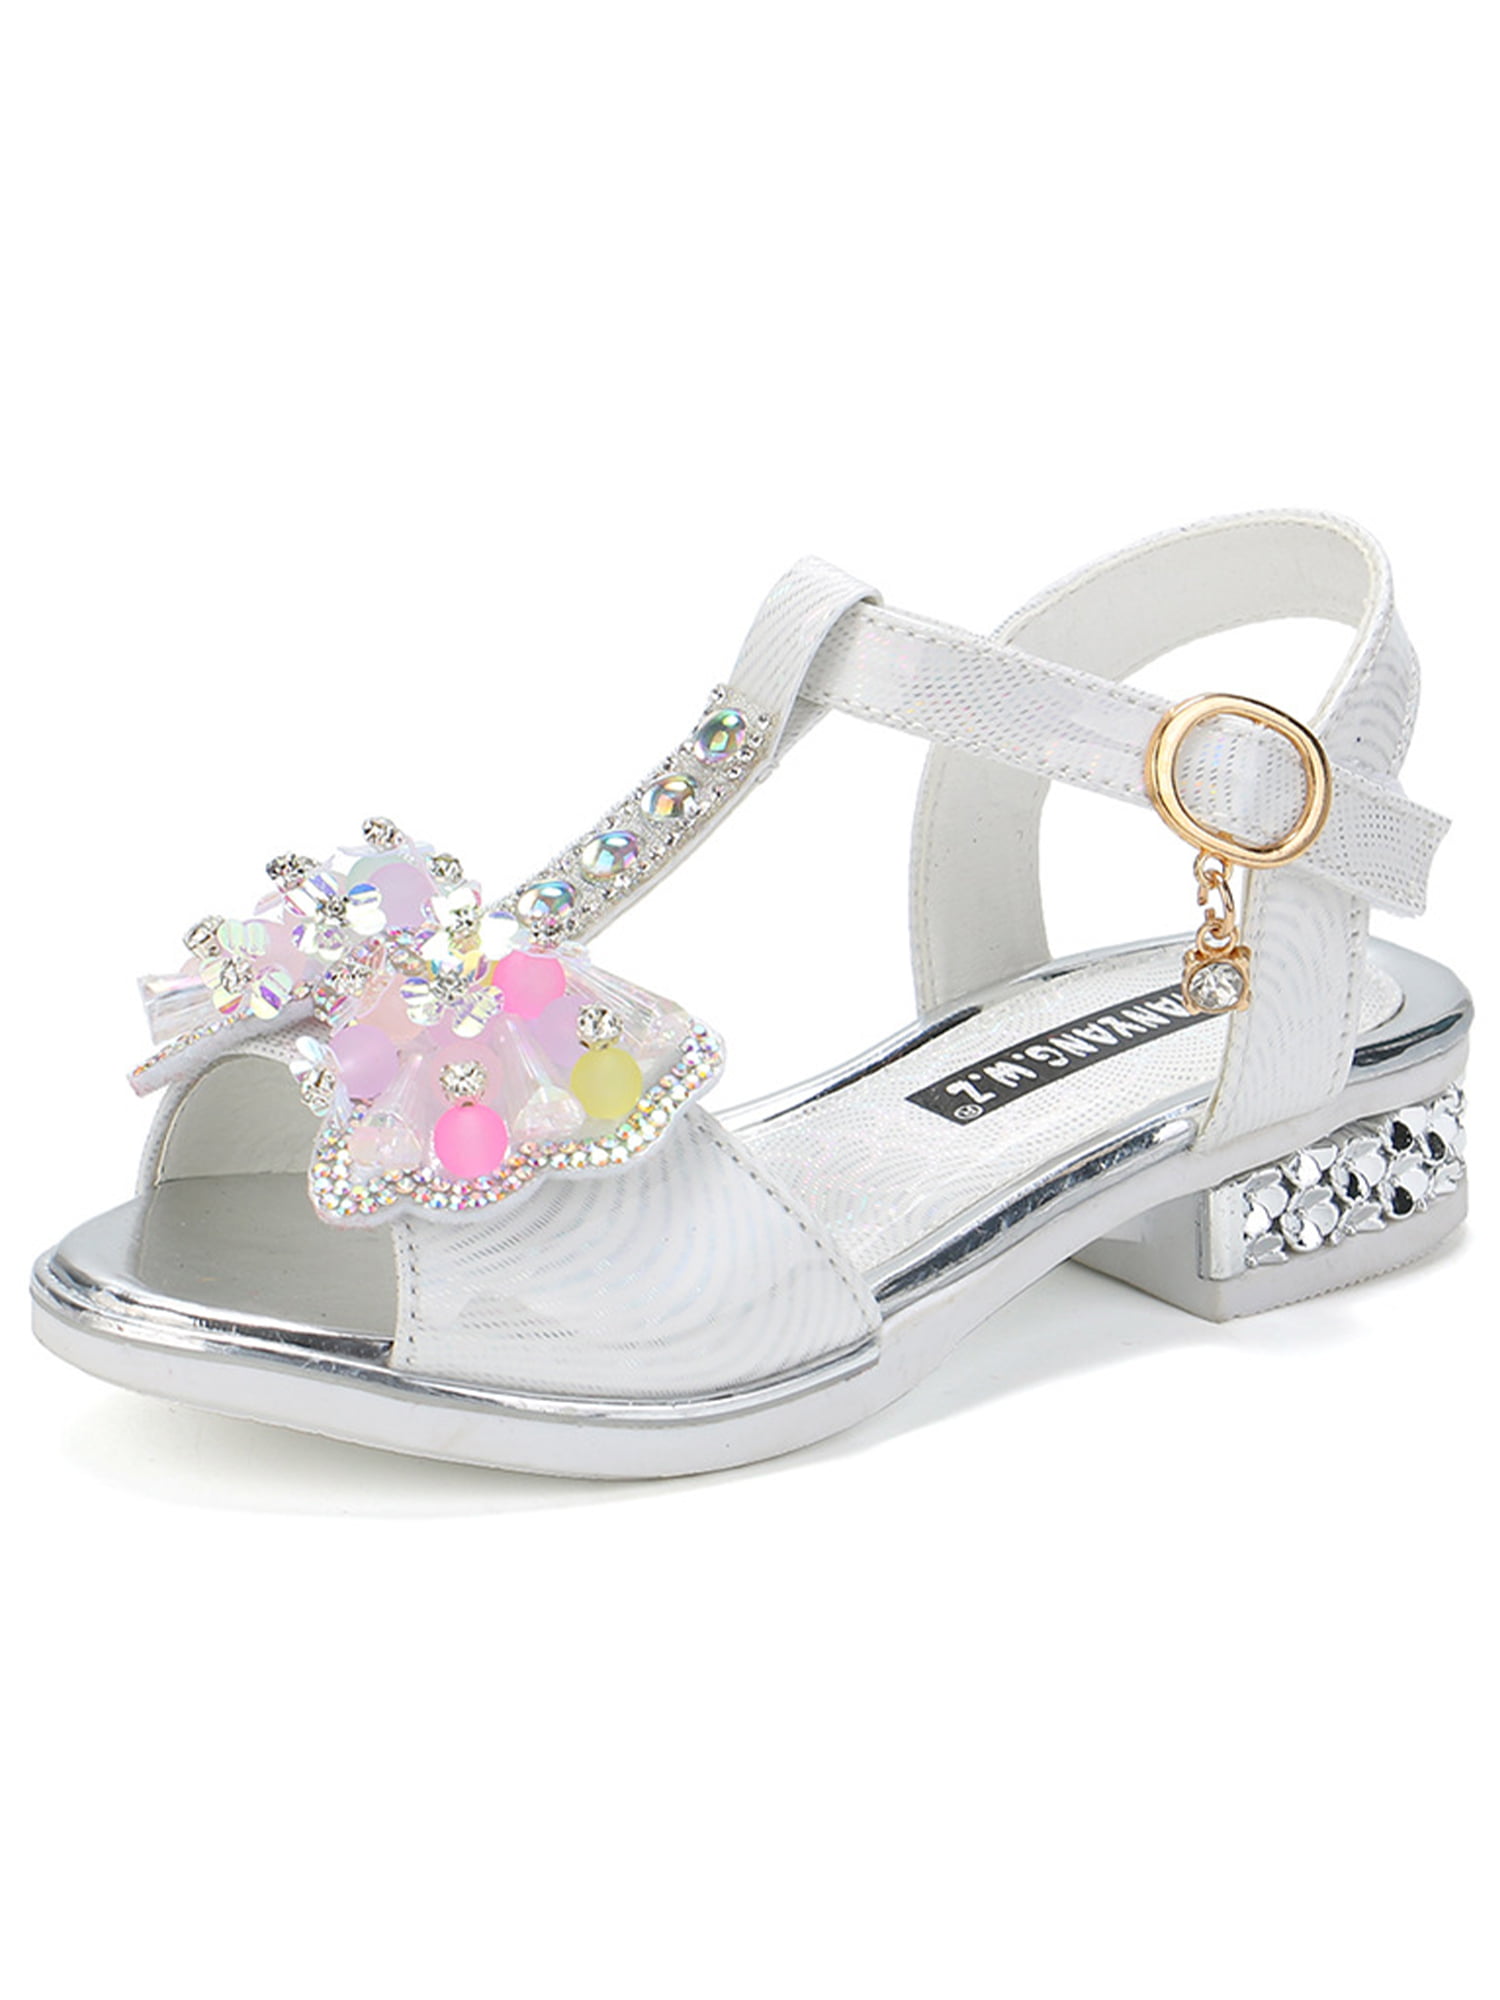 Lazzon Girls Princess Shoes Kids Sparkly Wedding Dress Up Heeled Sandals for Latin Cosplay Party Performance 